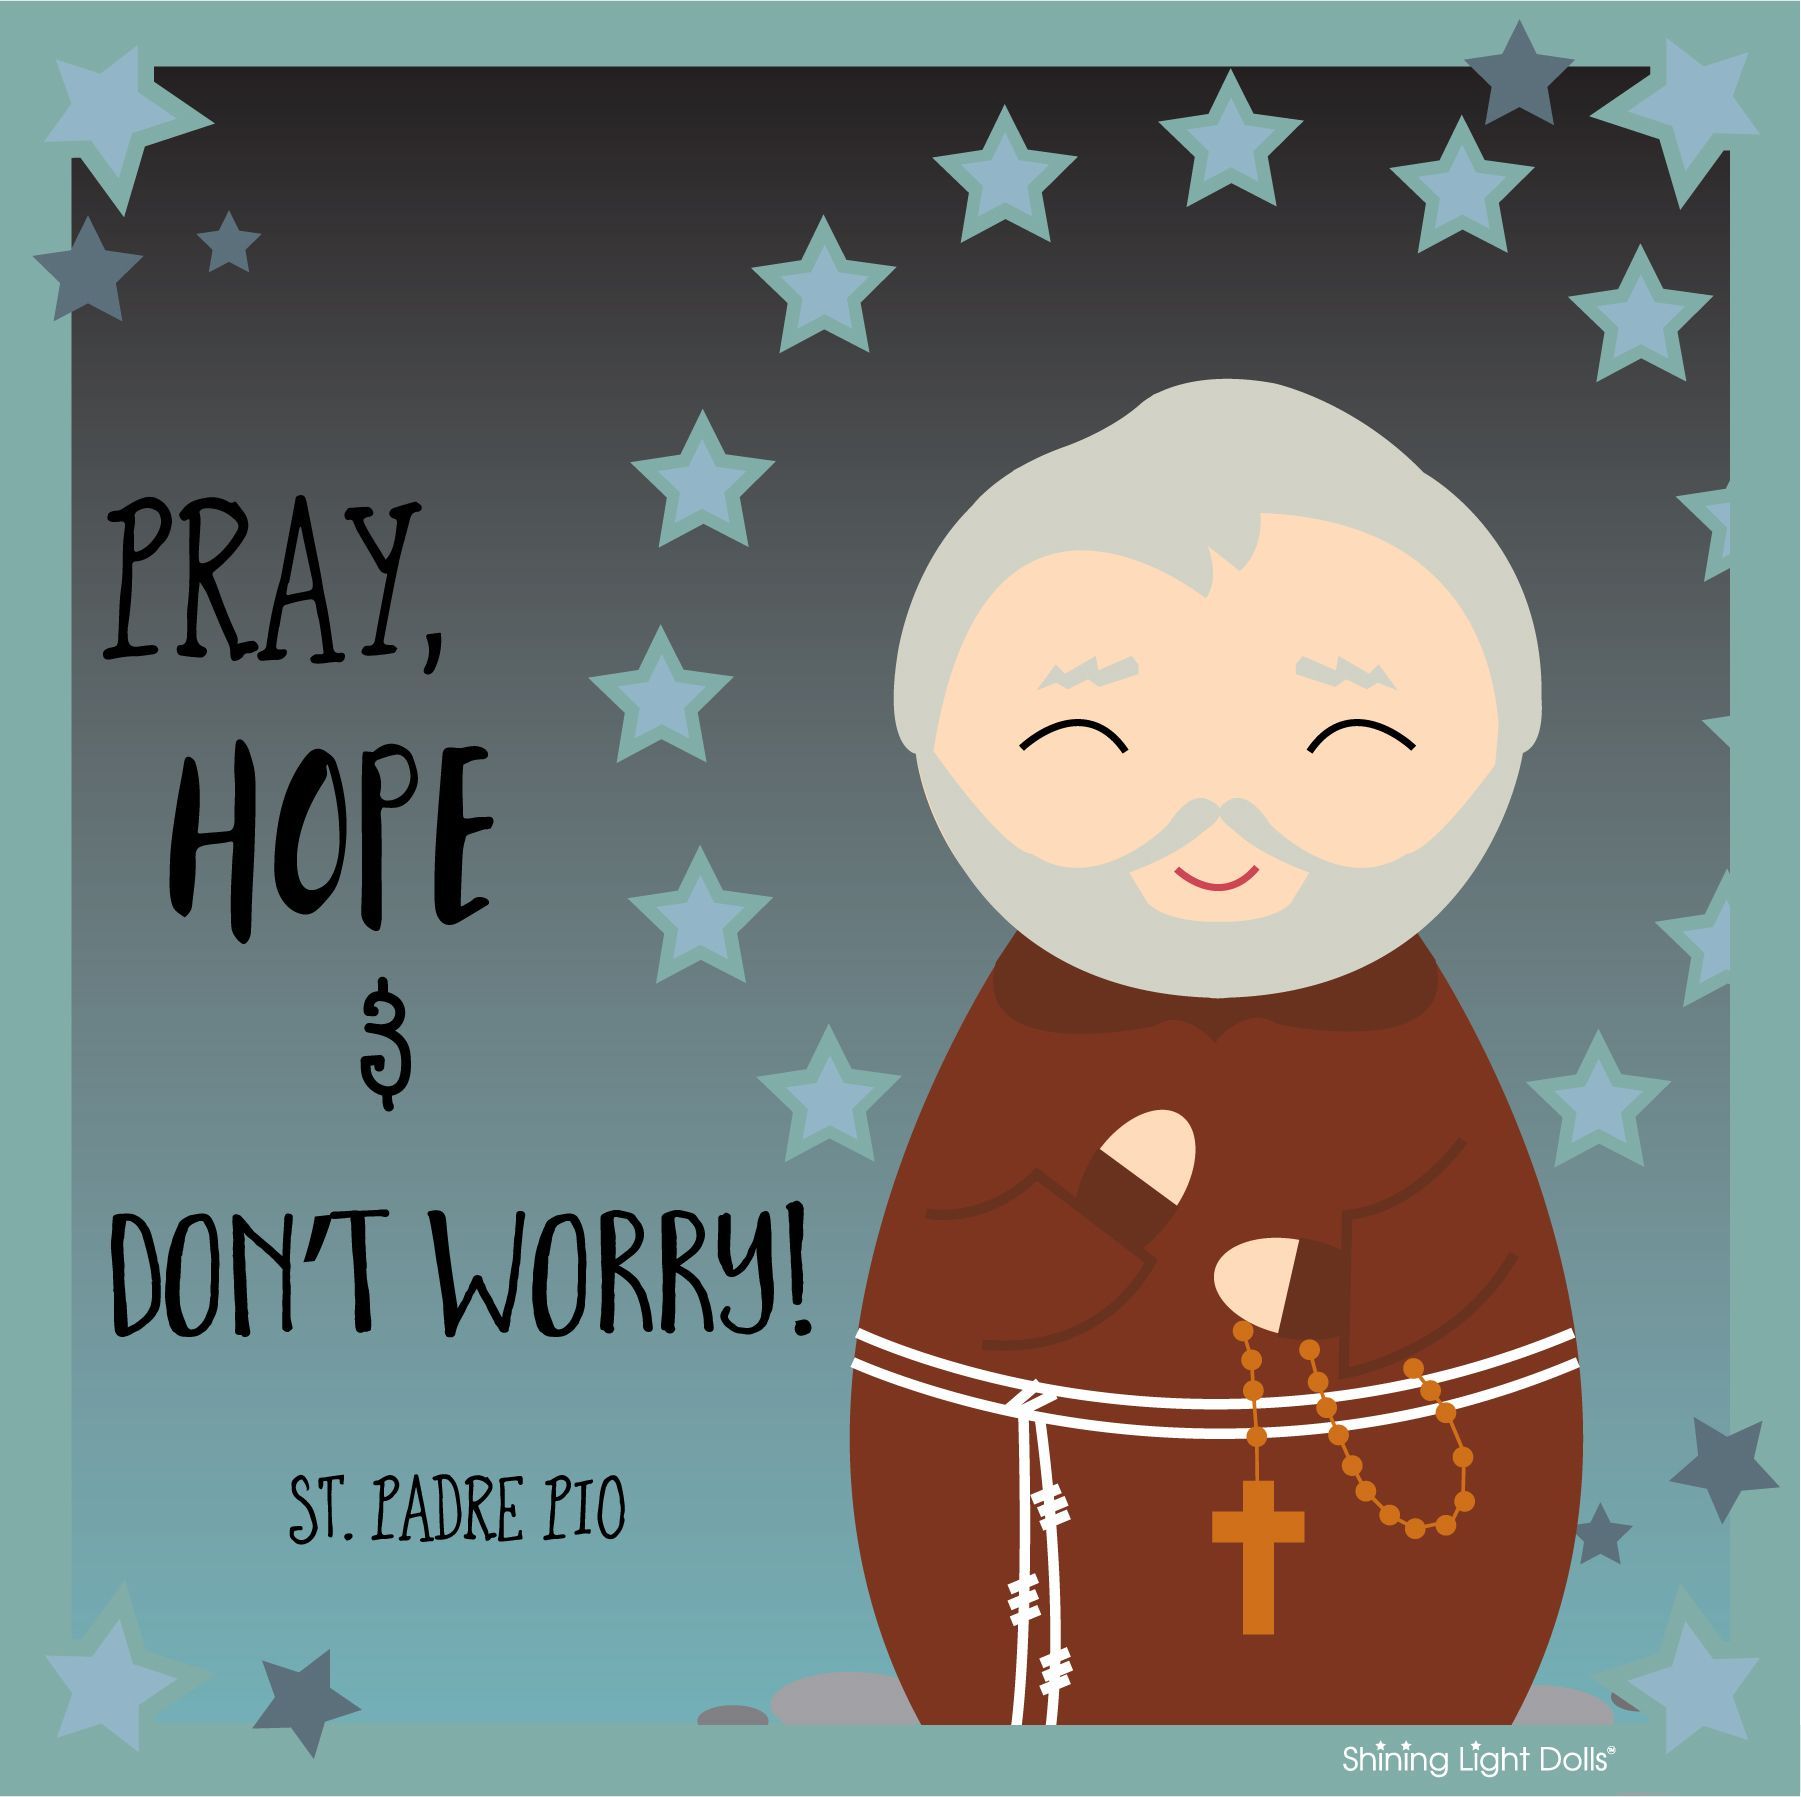 St. Padre Pio quote printable (free!) other Saints too! Pray, hope and don't worry. Catholic prayers, Catholic faith, Catholic saints